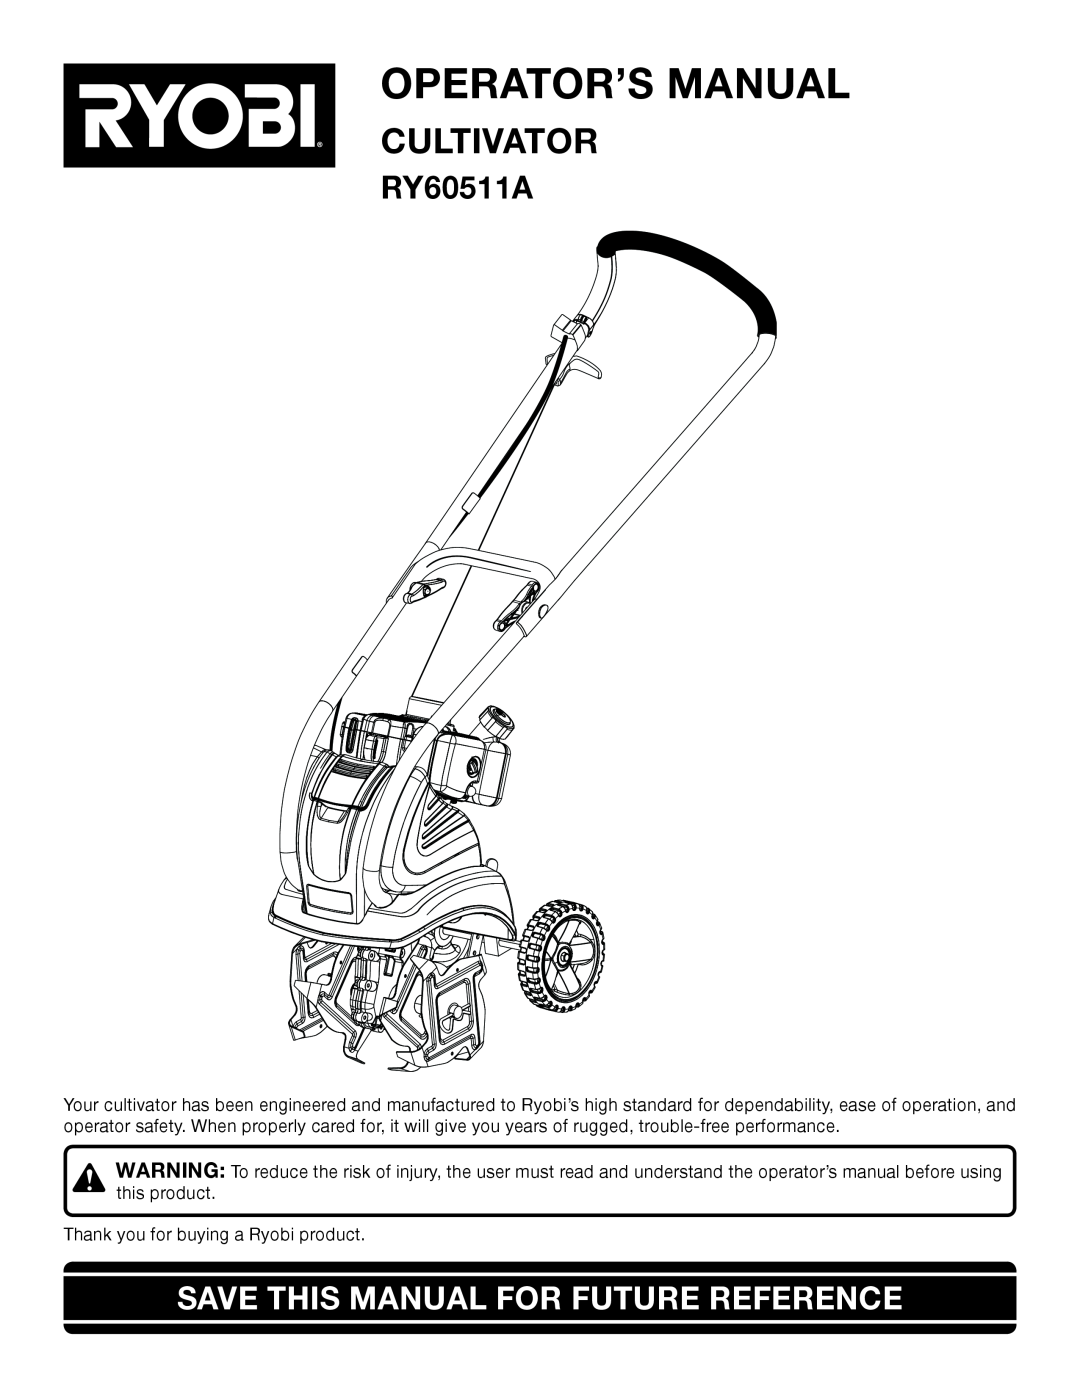 Ryobi Outdoor RY60511A manual Operator’S Manual, Cultivator, Save This Manual For Future Reference 